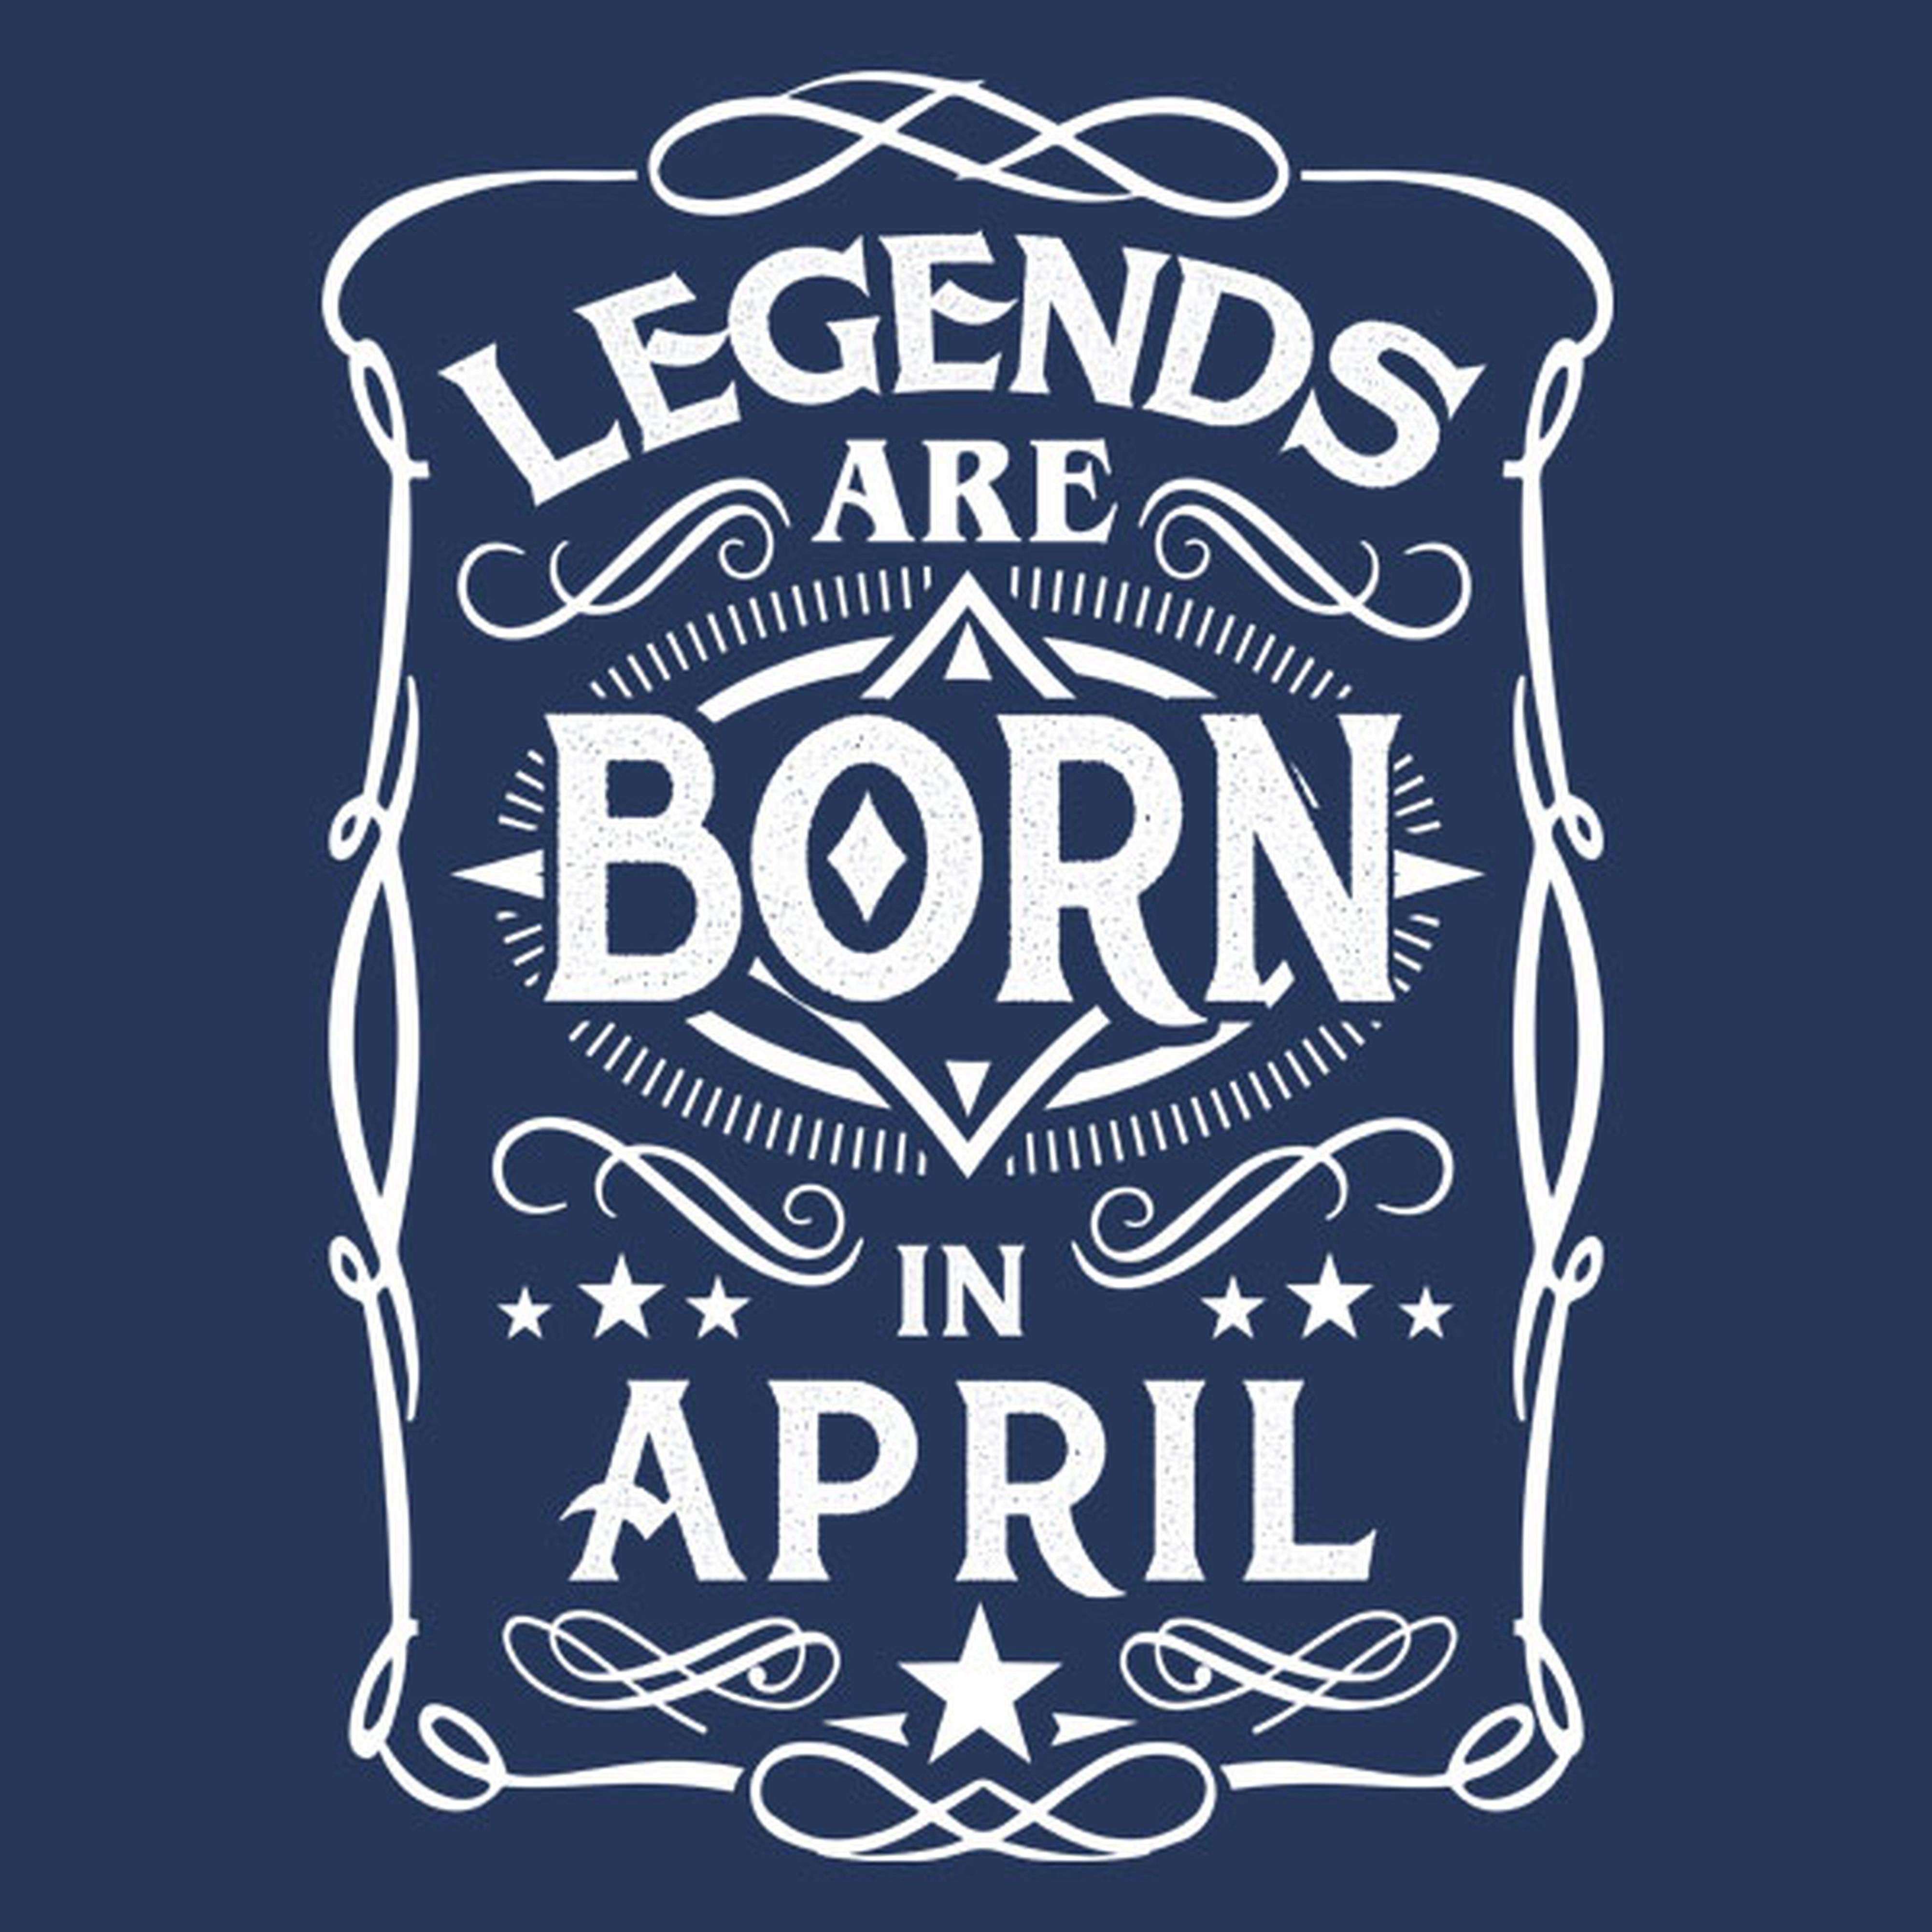 Legends are born in April - T-shirt